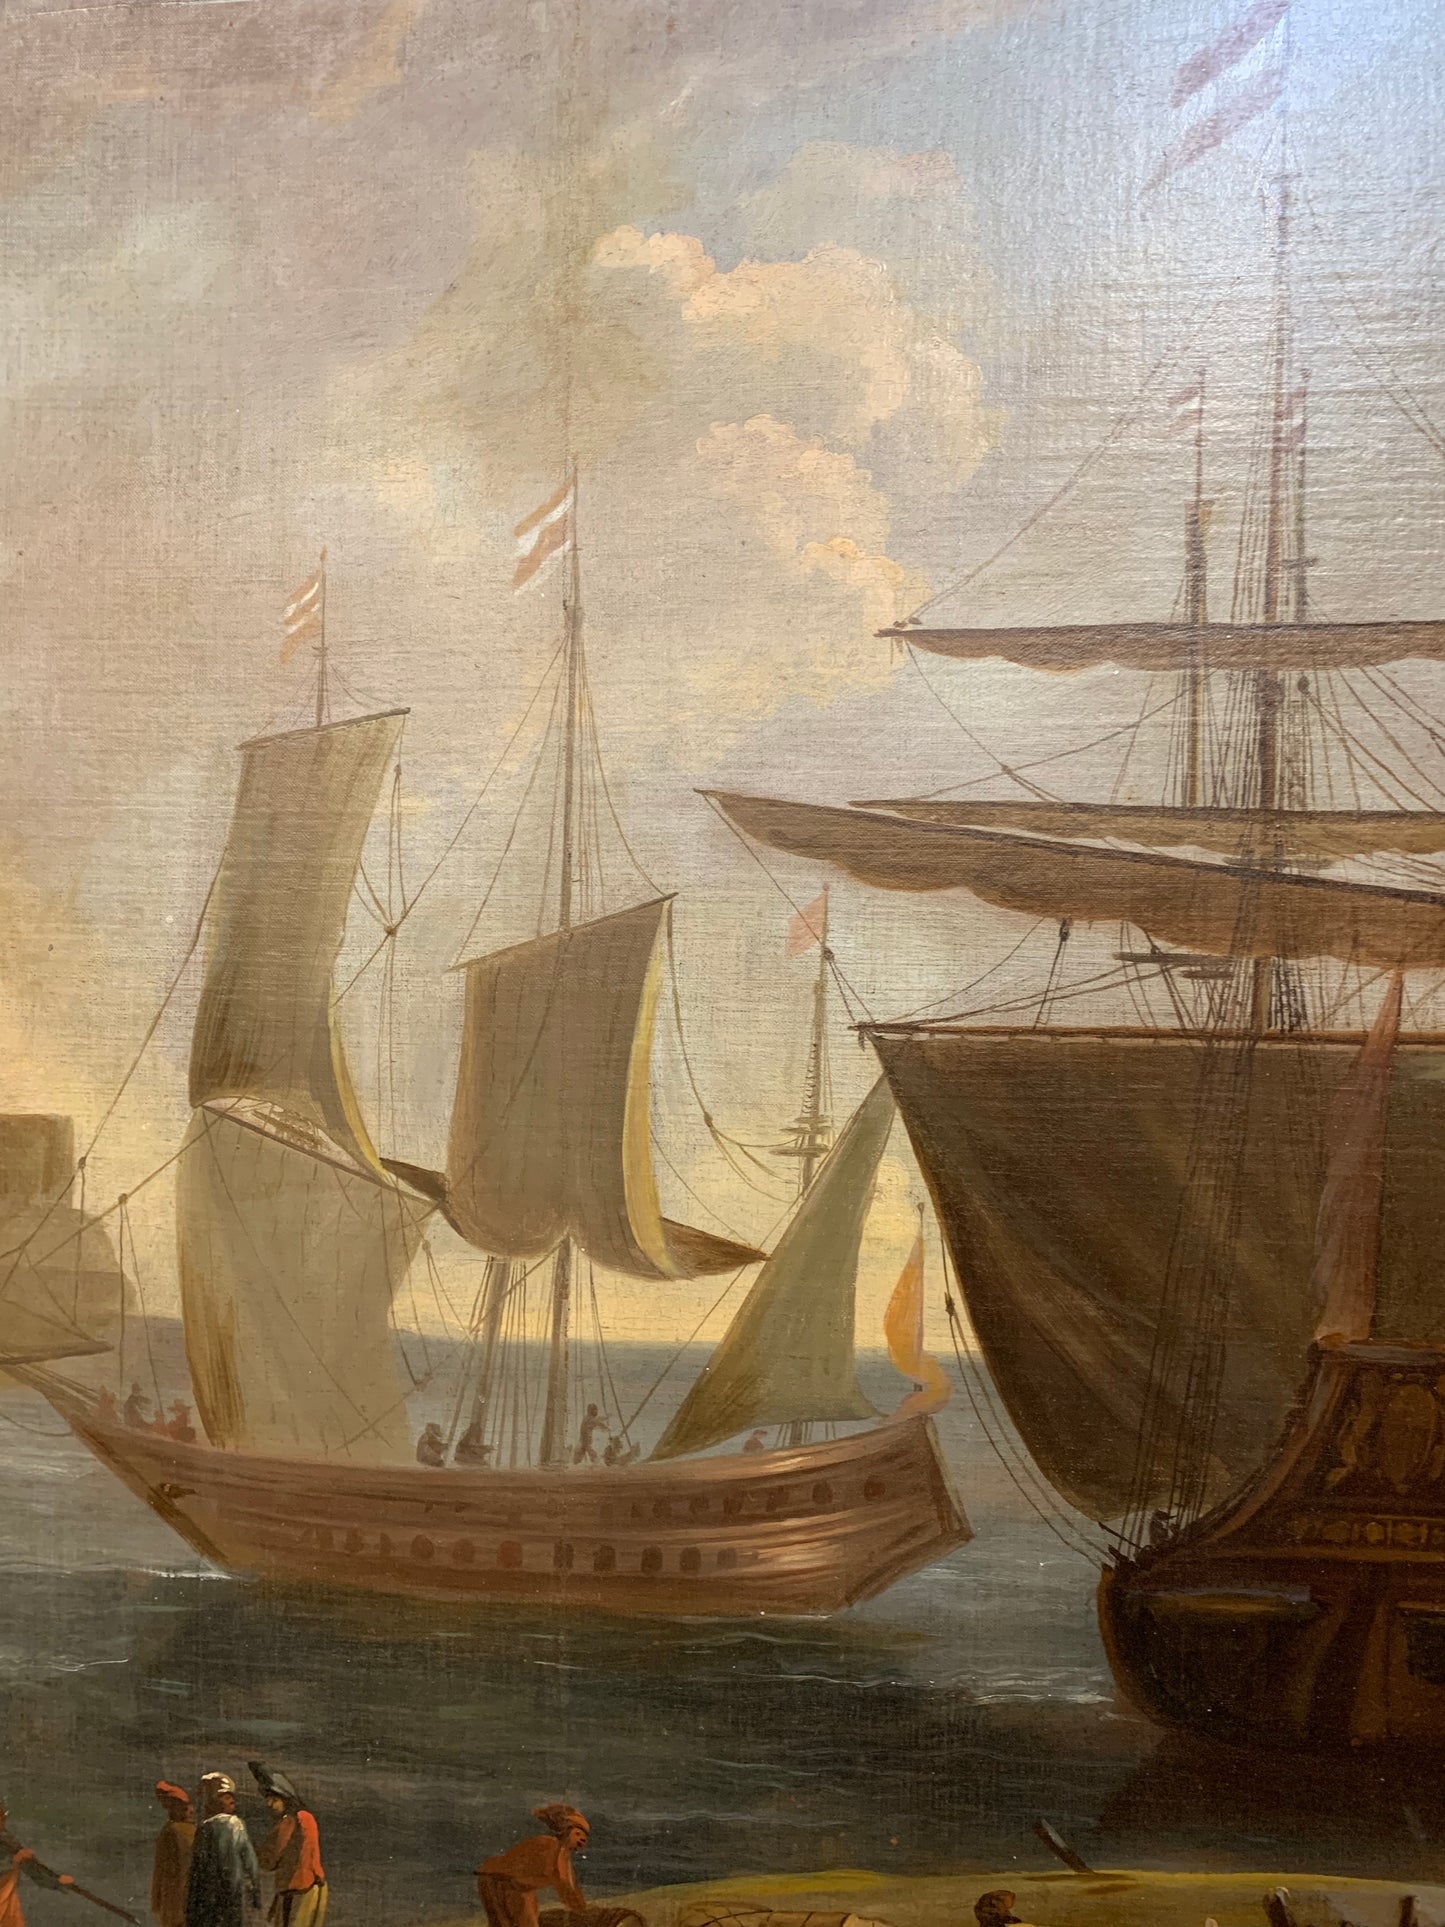 Large Marine painting with Ships in the port.   Late 18th century.